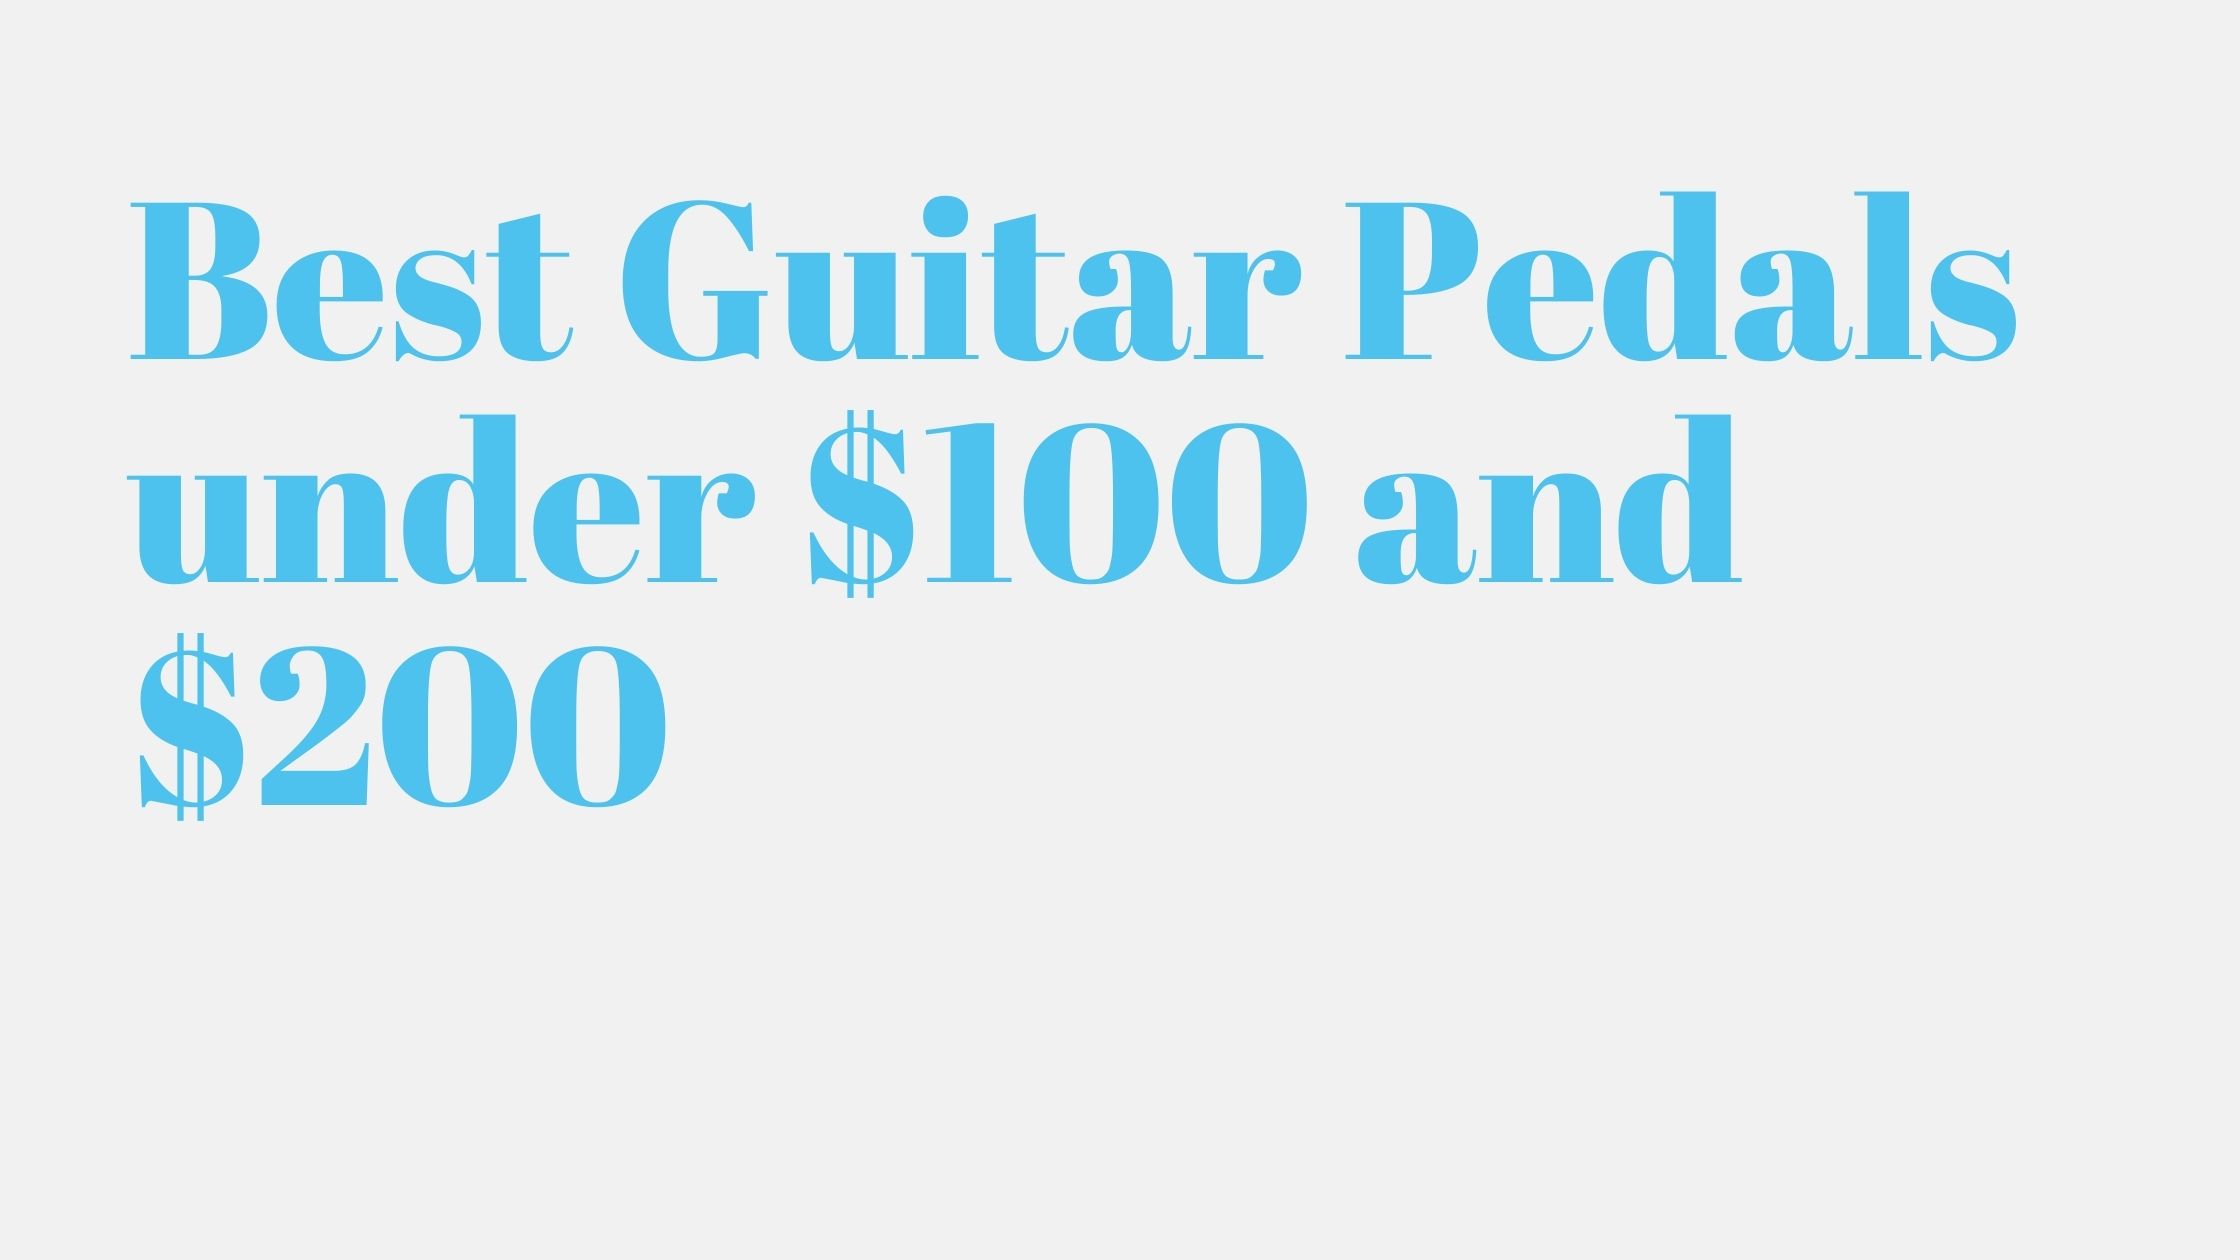 10 Best Guitar Pedals under $100 and $200